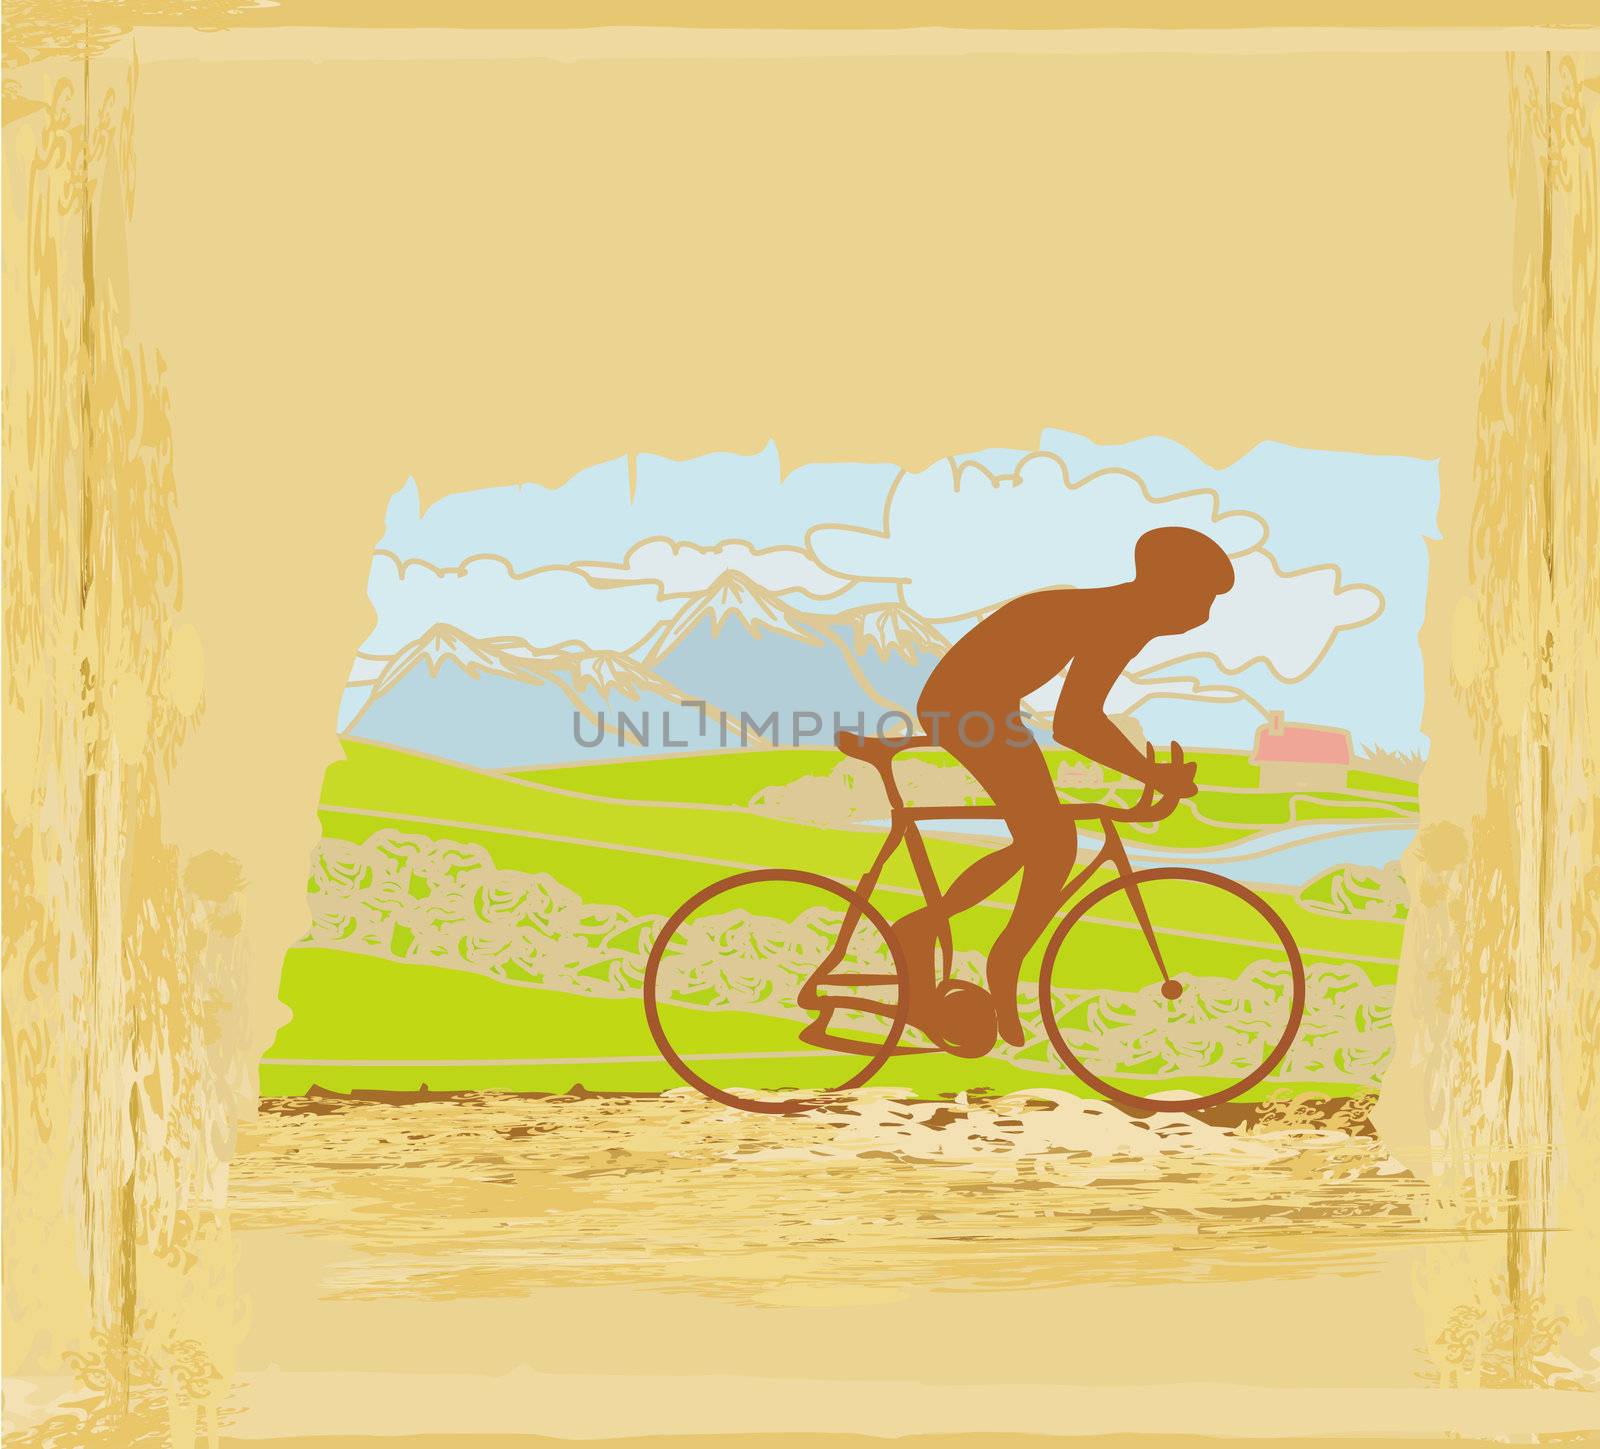 Cycling Grunge Poster Template vector